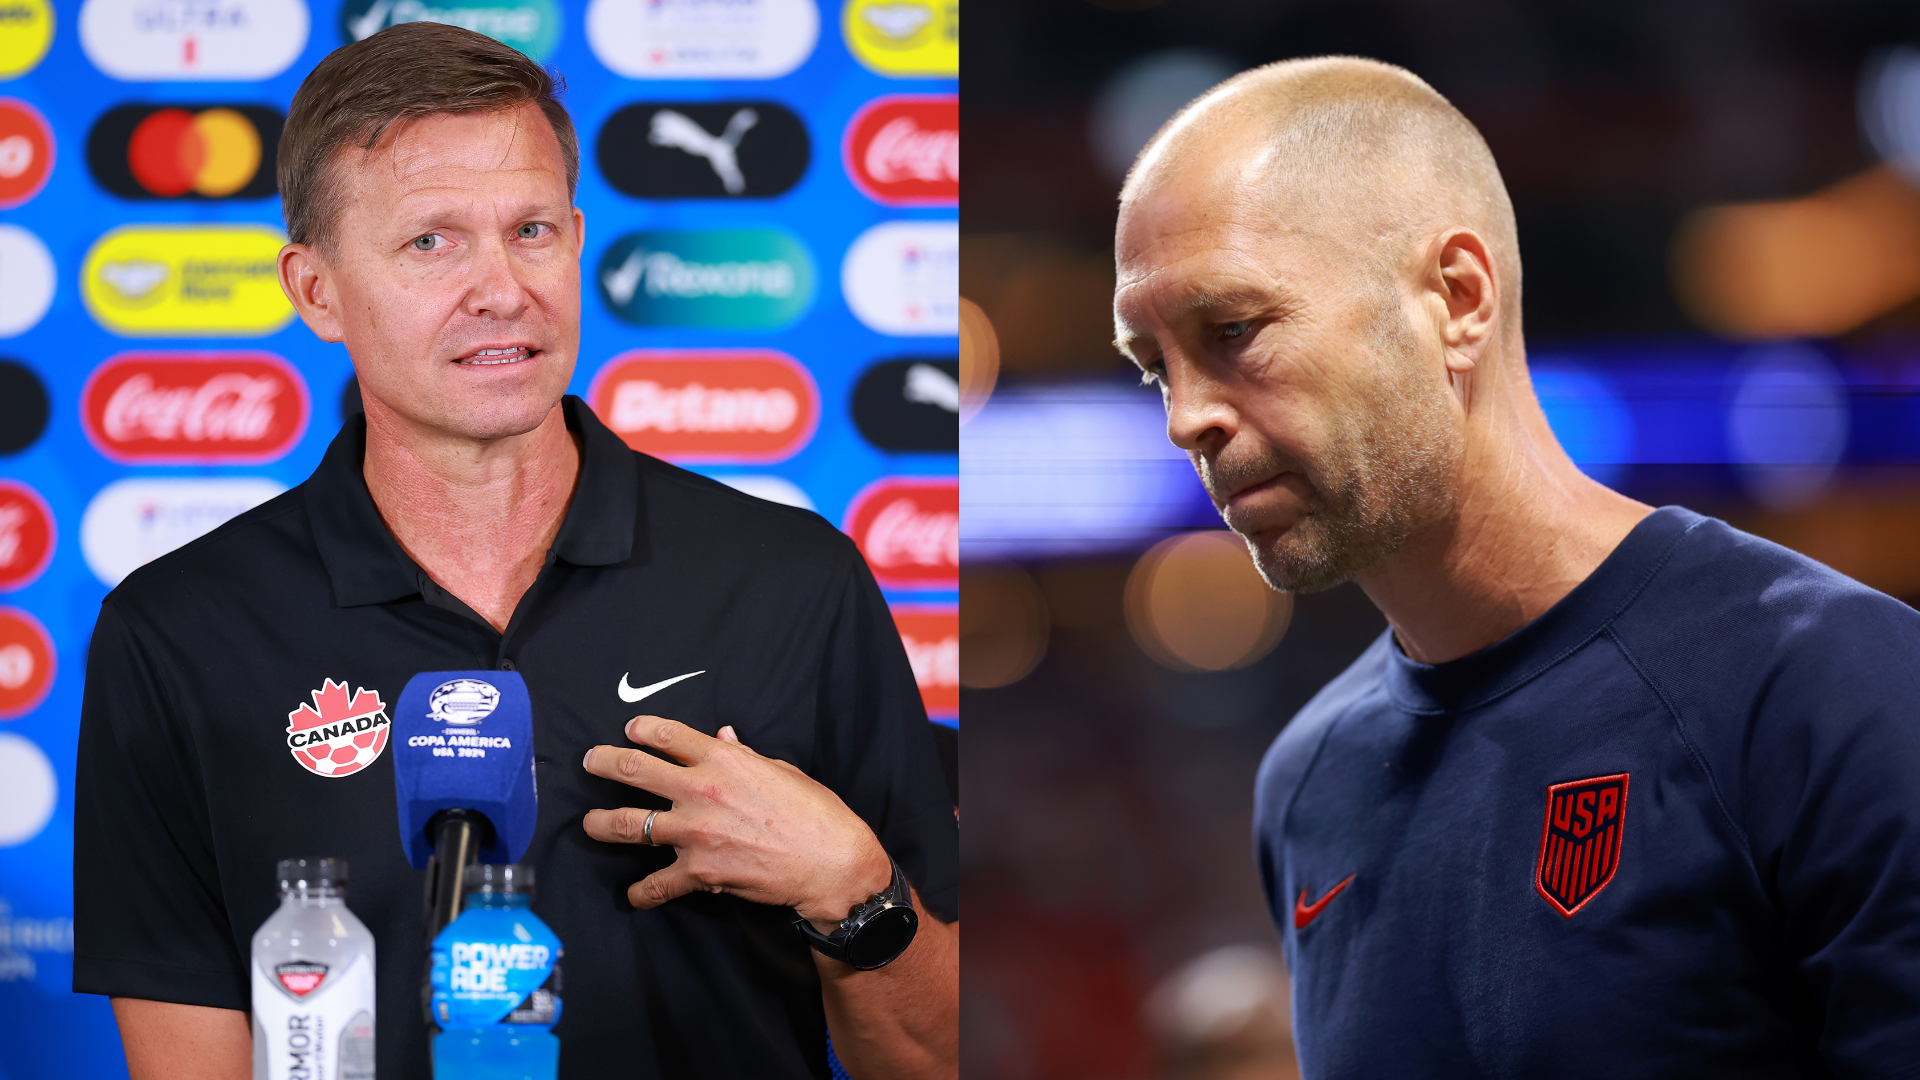 'Glad I'm here' - Canada boss Jesse Marsch blasts USMNT for 'lack of discipline' after seeing Gregg Berhalter's side implode in Copa America group stage